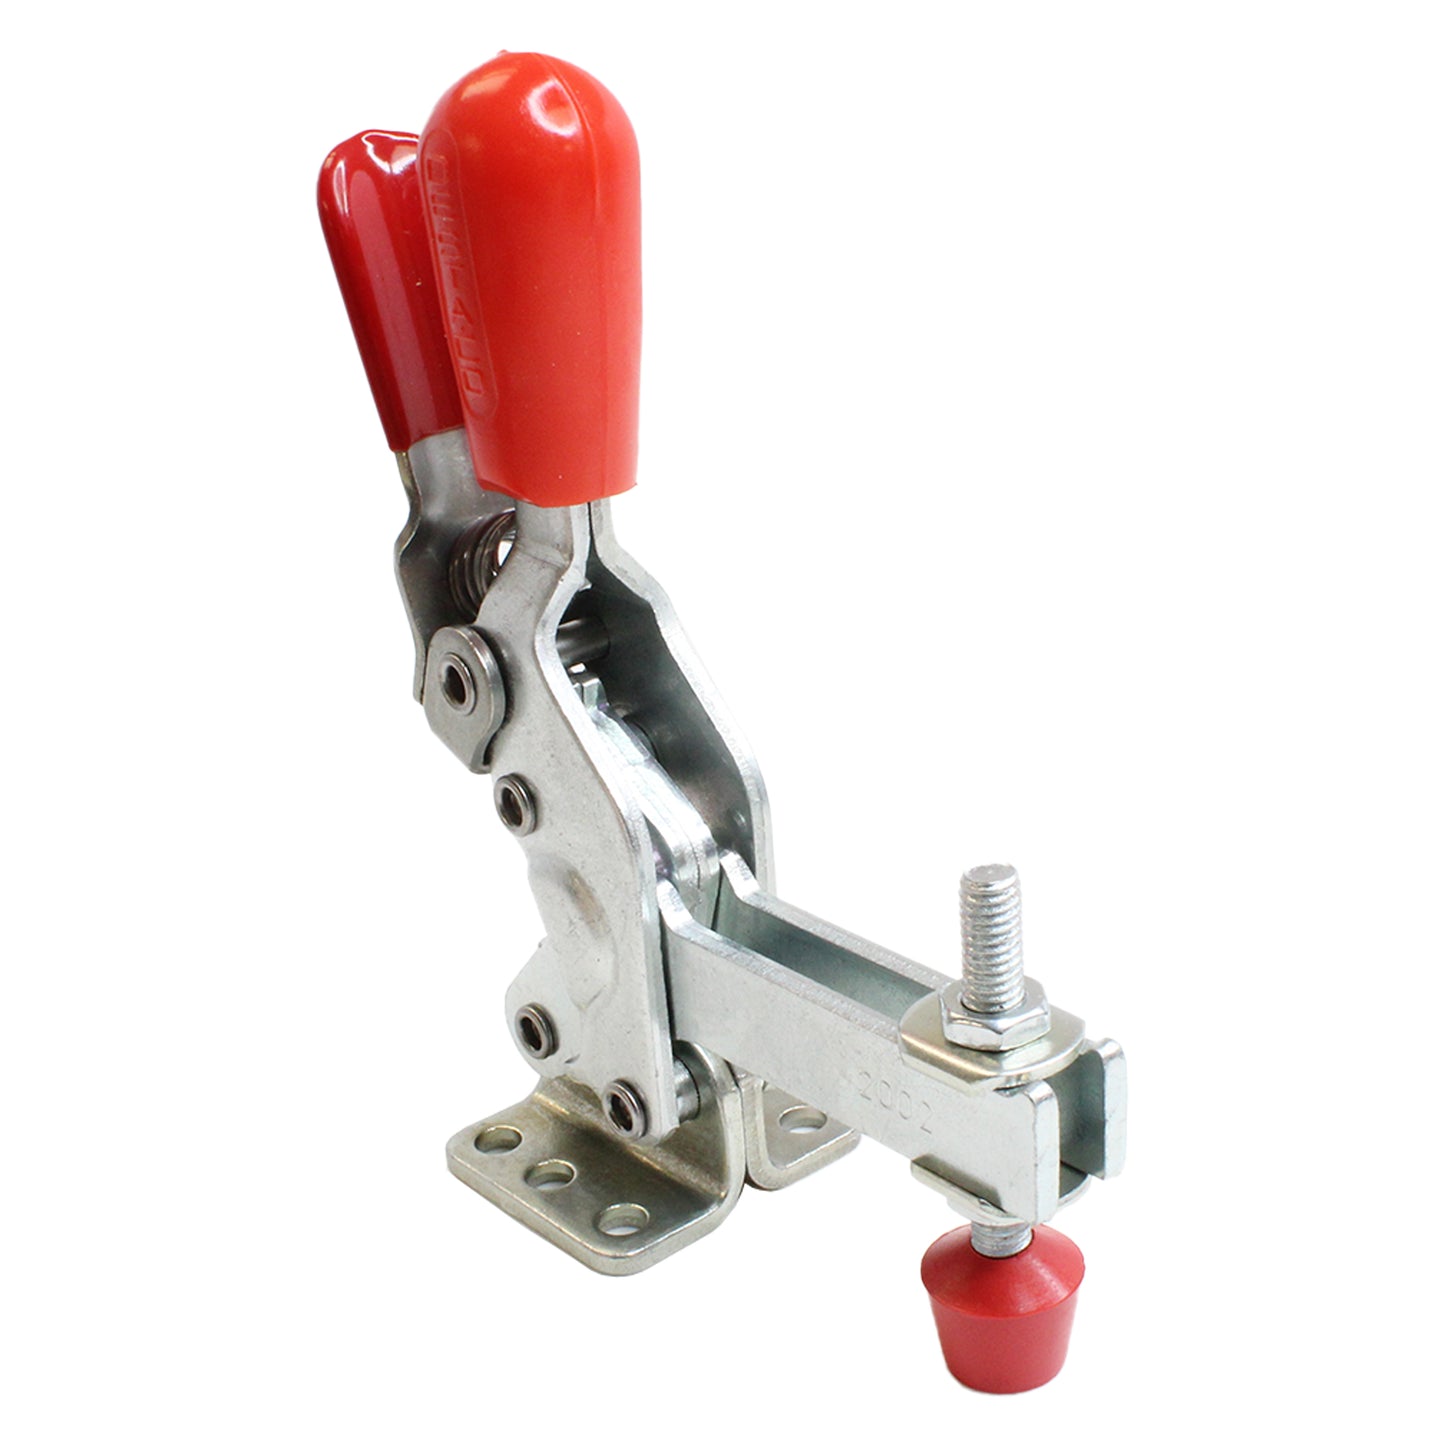 Destaco 2002-UR Vertical Hold-Down Toggle Locking Clamp